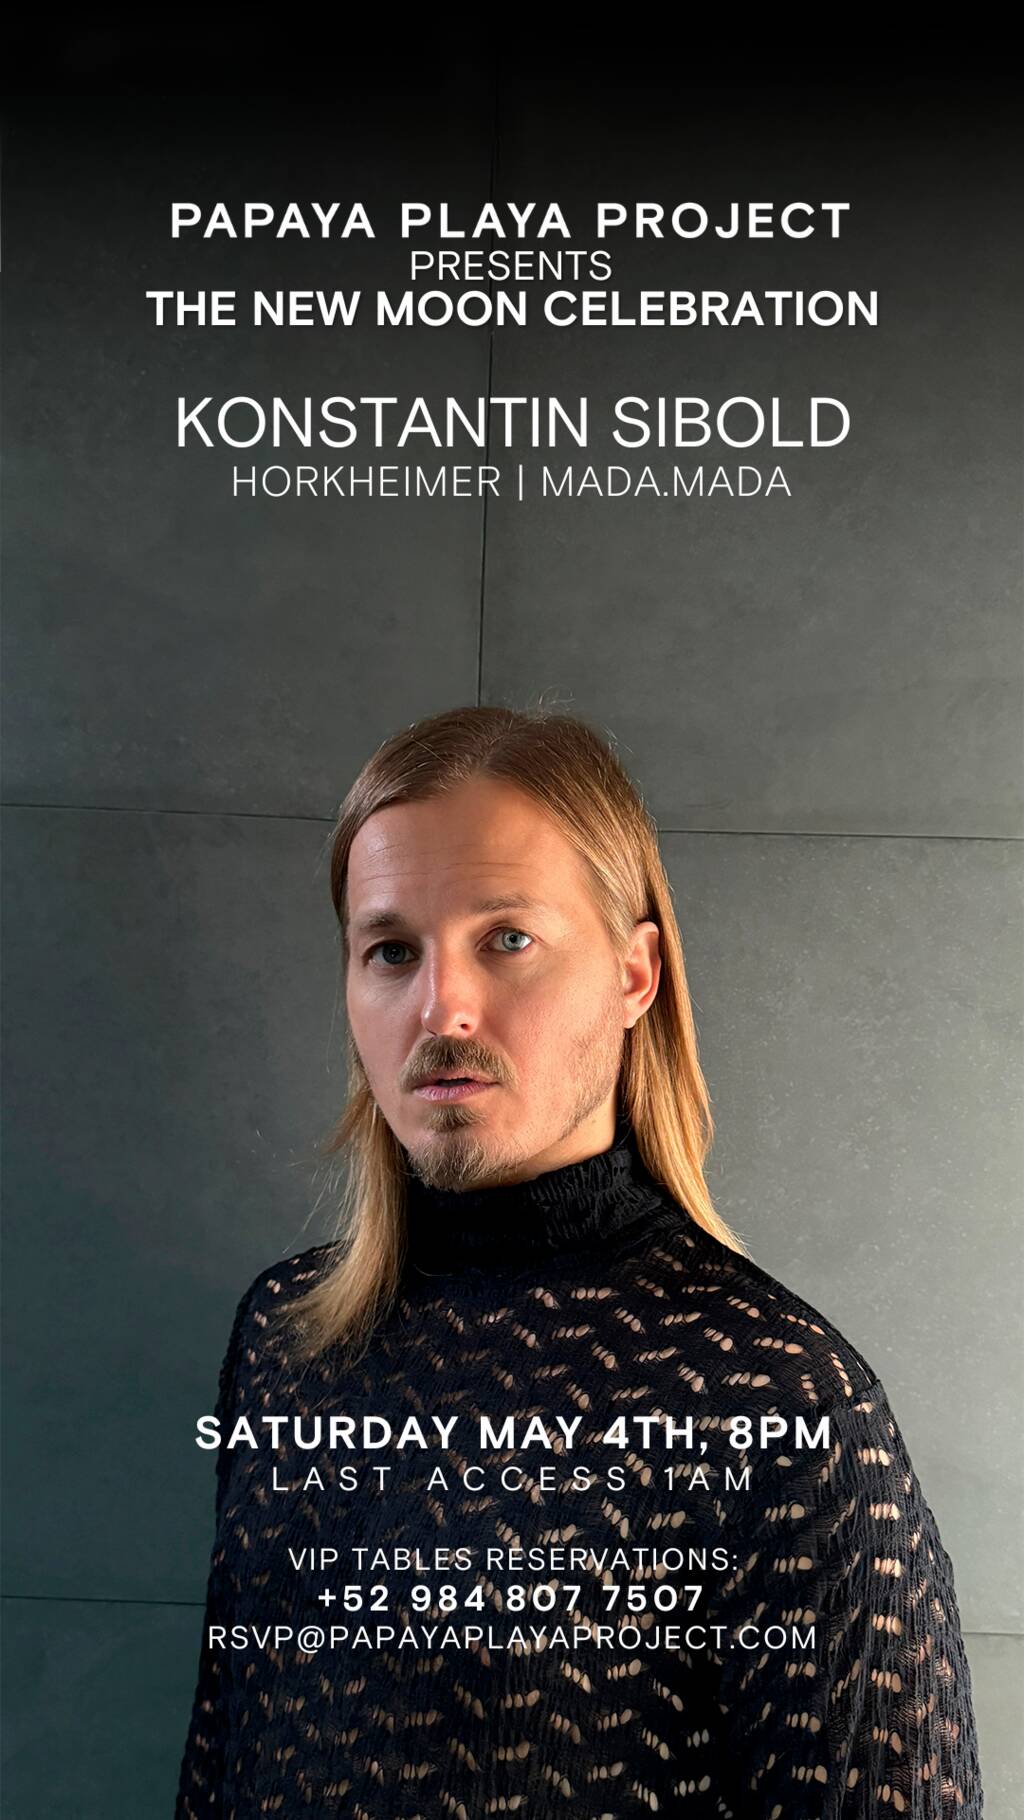 PPP PRESENTS THE NEW MOON @KONSTANTIN SIBOLD